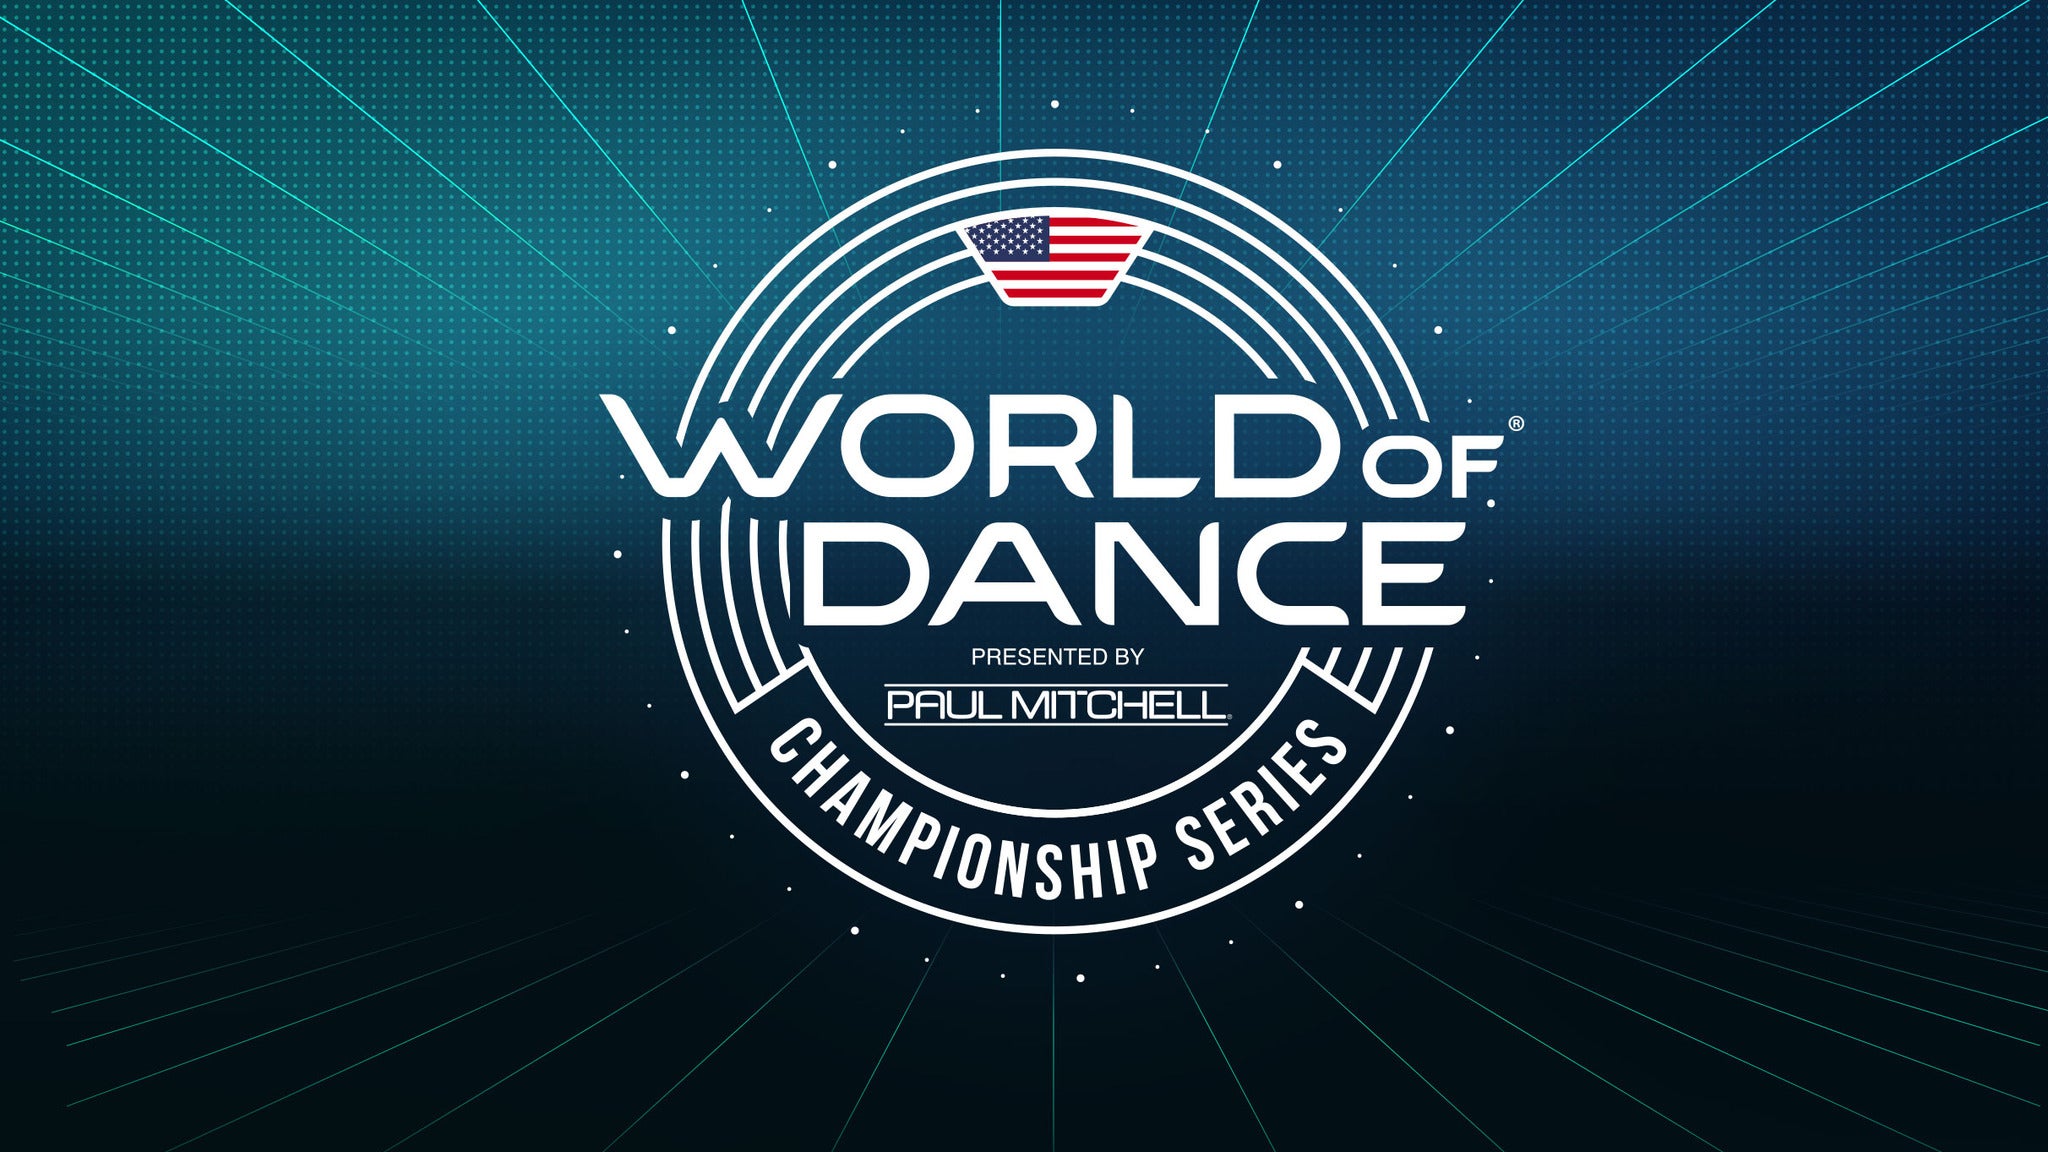 World of Dance OC in Anaheim promo photo for Citi® Cardmember presale offer code